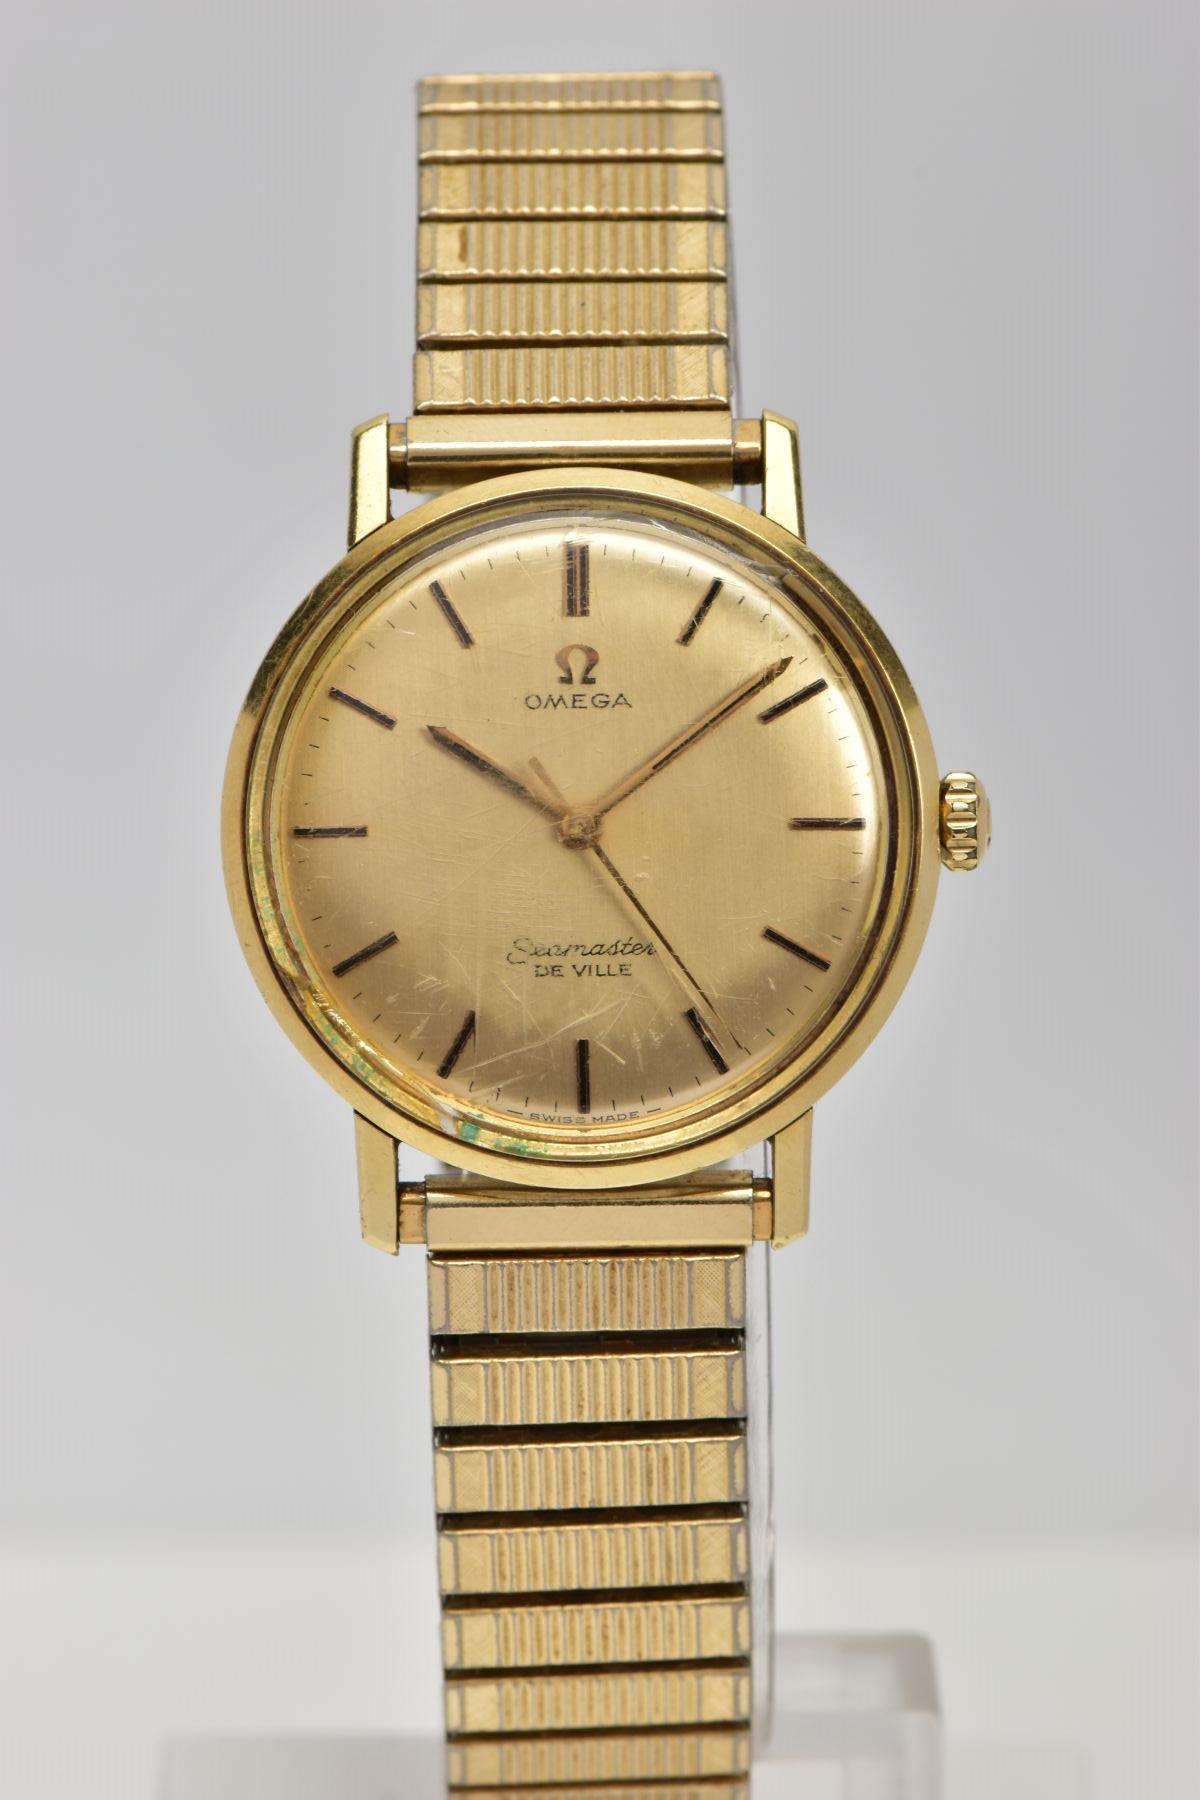 A GENTLEMENS 'OMEGA SEAMASTER DE VILLE' WRISTWATCH, hand wound movement, round gold dial signed '